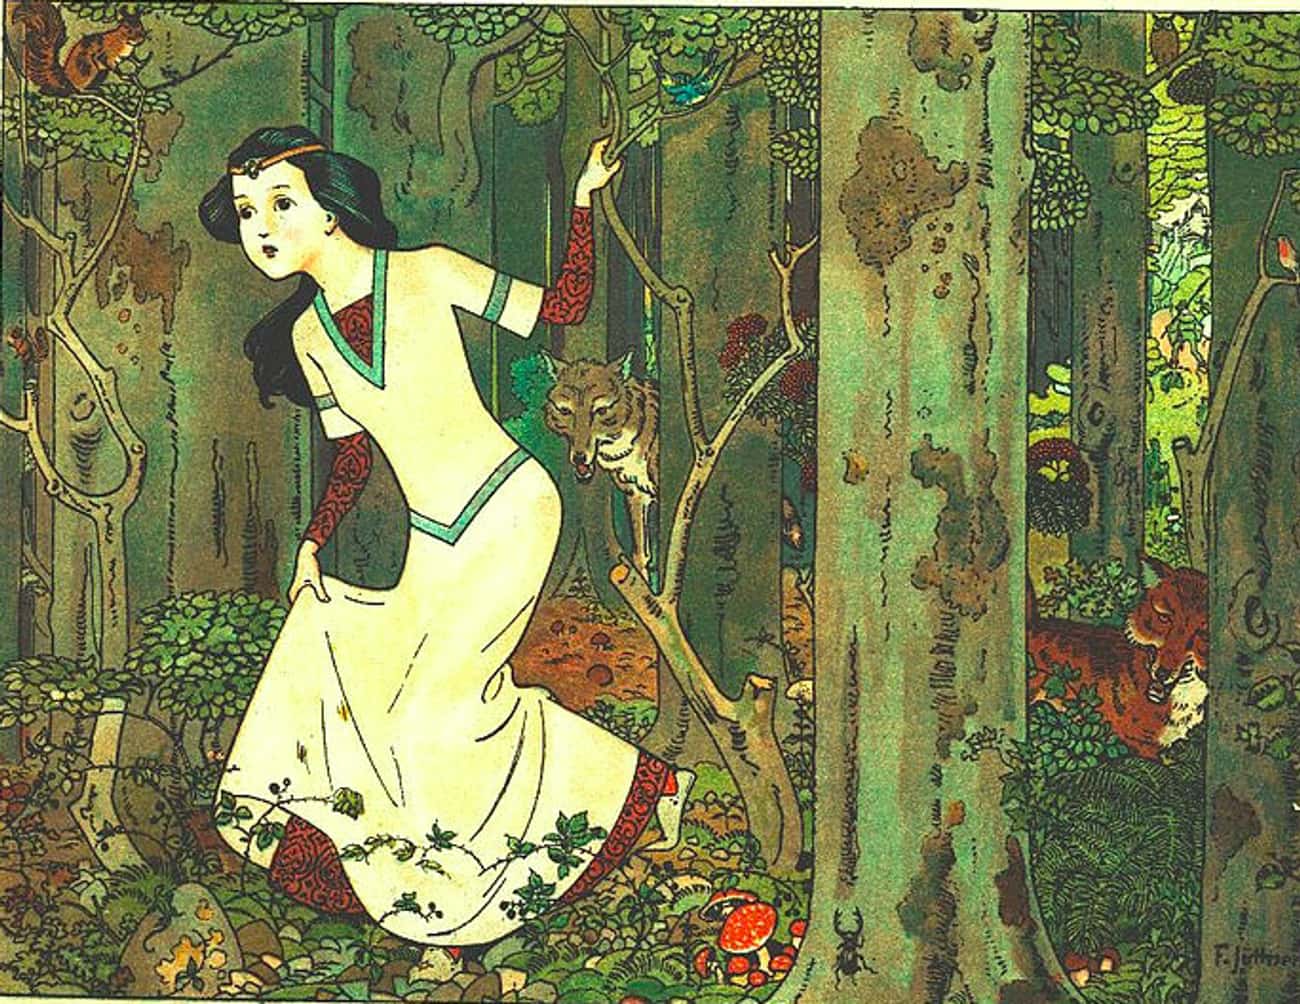 Two Women Are Thought To Possibly Be The Inspiration For Snow White